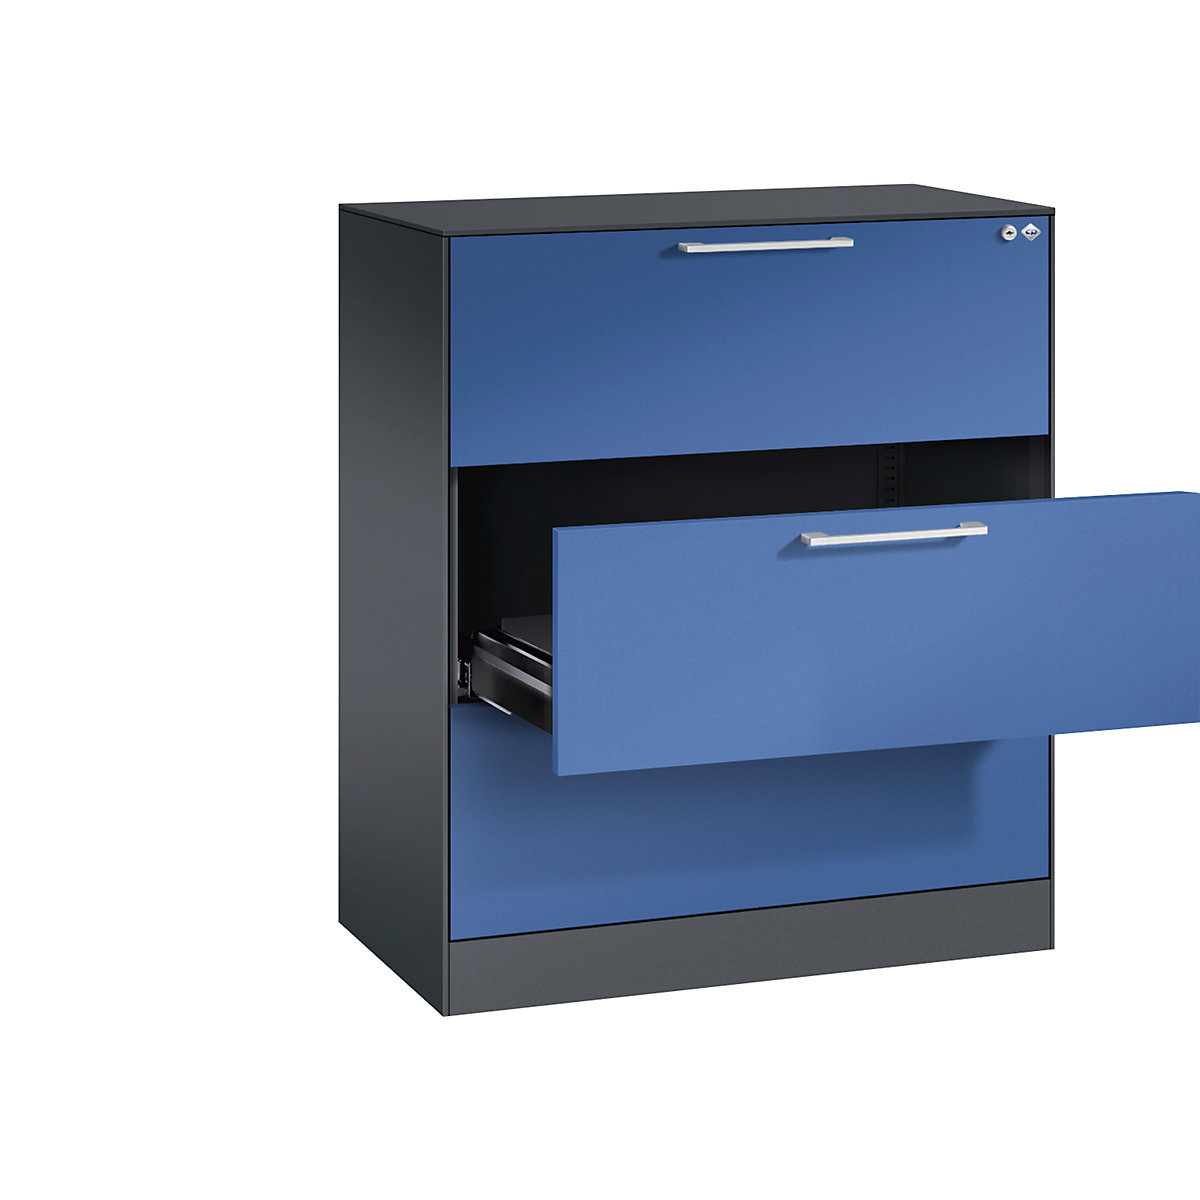 ASISTO card file cabinet – C+P, height 992 mm, with 3 drawers, A4 landscape, black grey/gentian blue-19